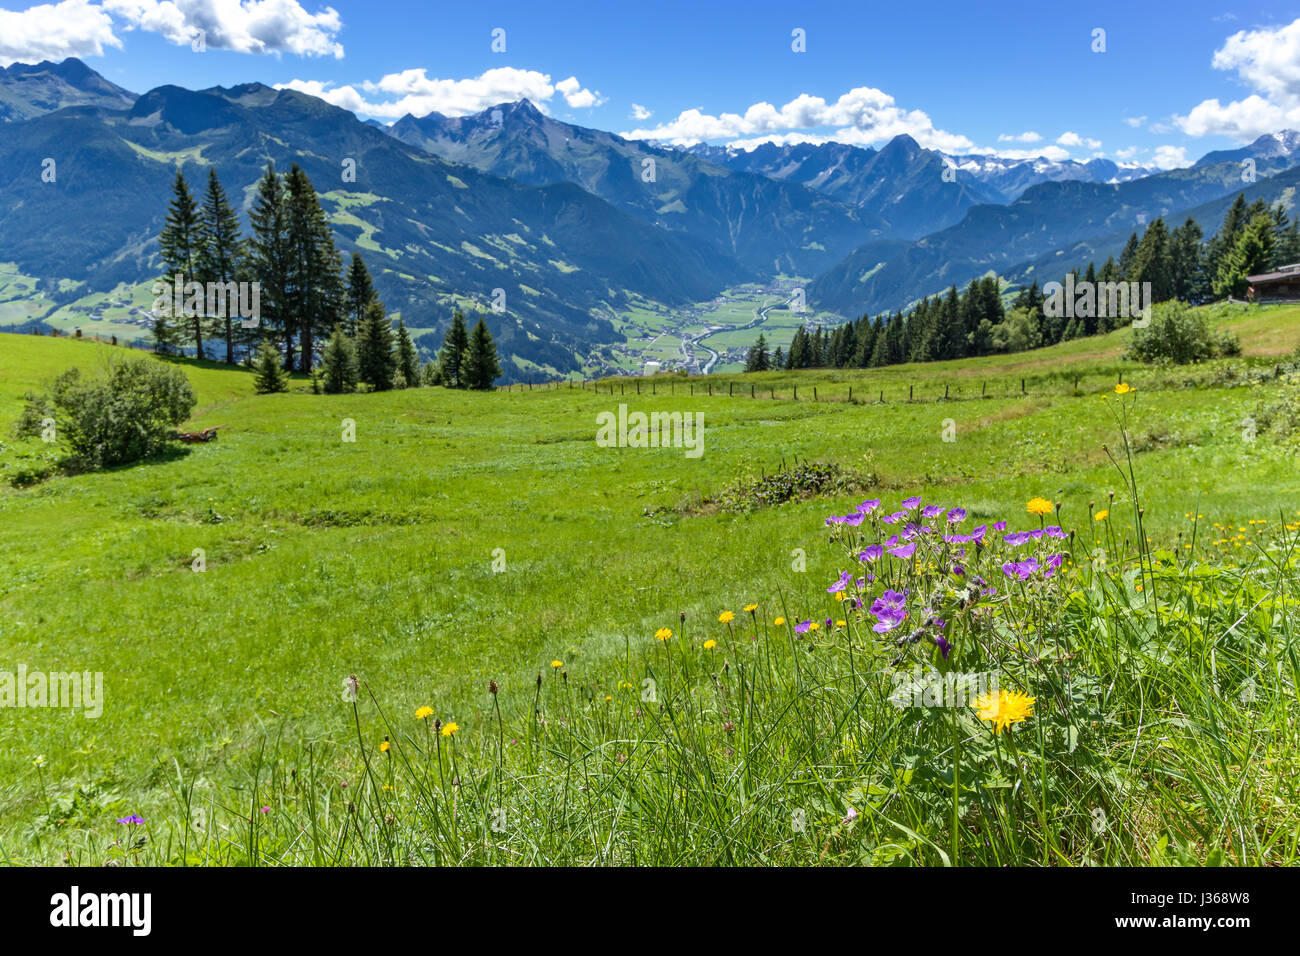 Alpine mountain view with bright green meadow in the foreground. Austria, Tirol, Zillertal, Zillertal High Alpine Road Stock Photo